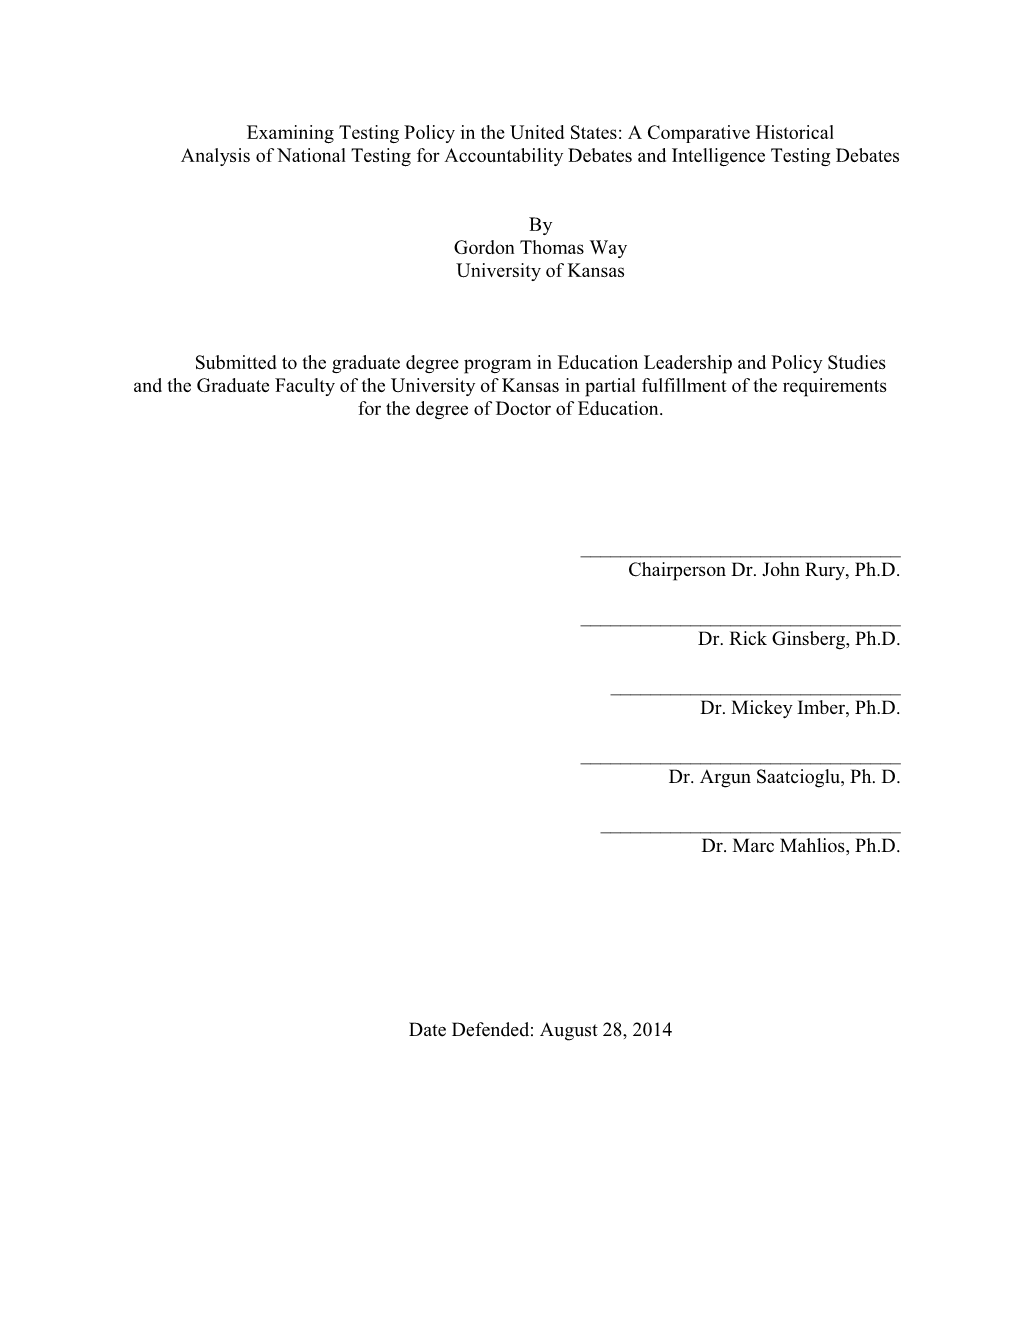 Examining Testing Policy in the United States: a Comparative Historical Analysis of National Testing for Accountability Debates and Intelligence Testing Debates